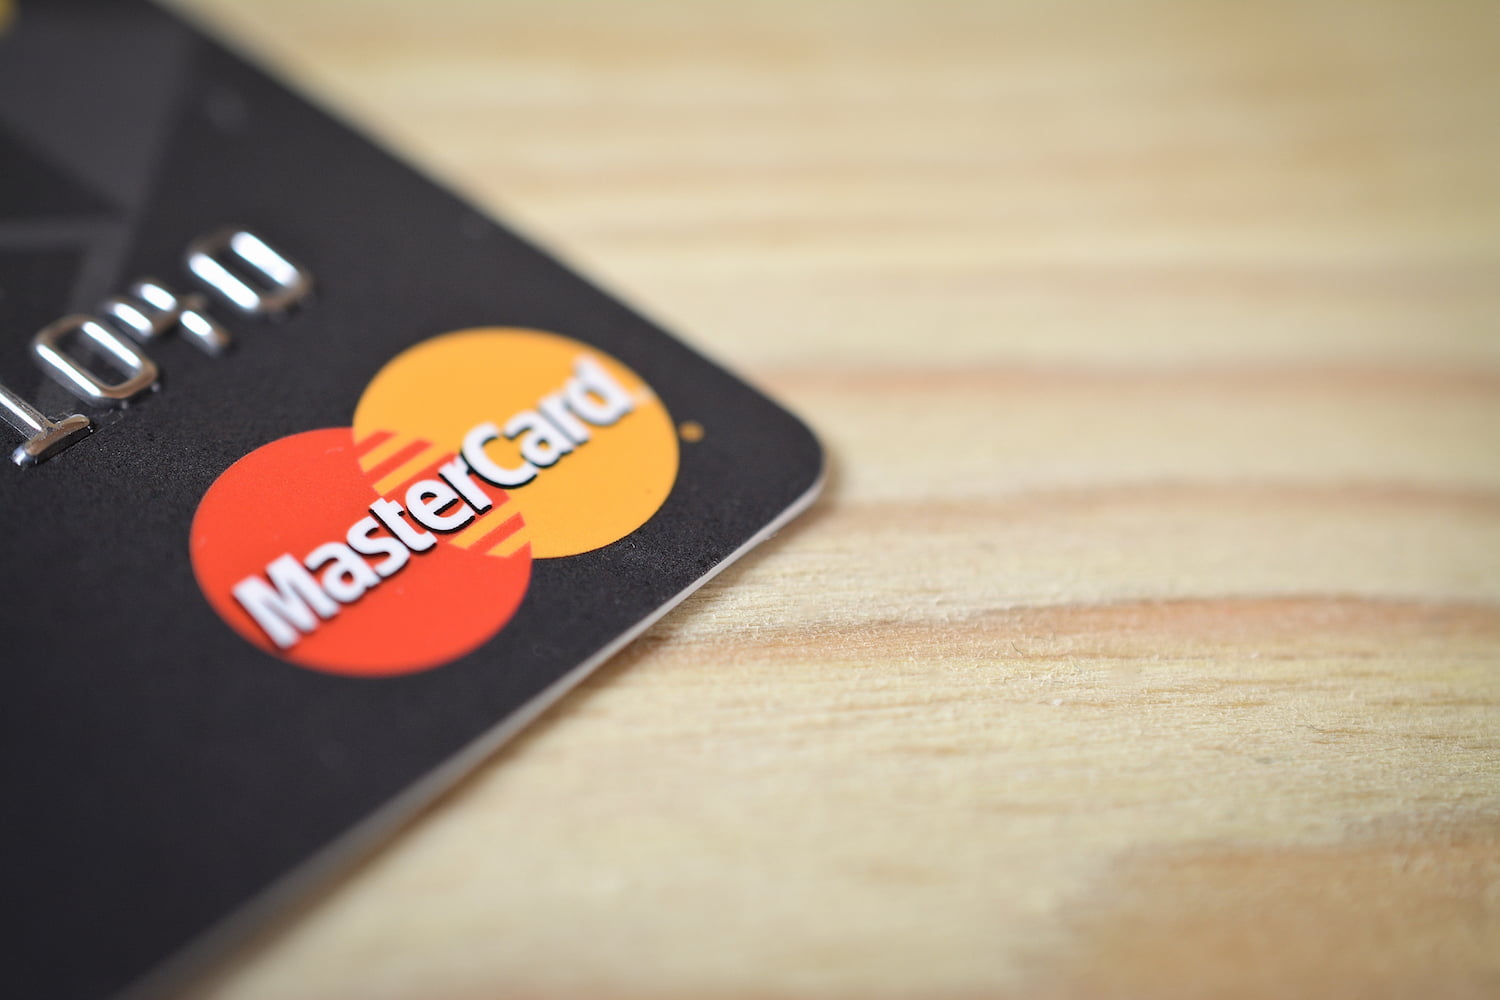 Mastercard Eyes Cryptocurrency Refunds in New Patent Application